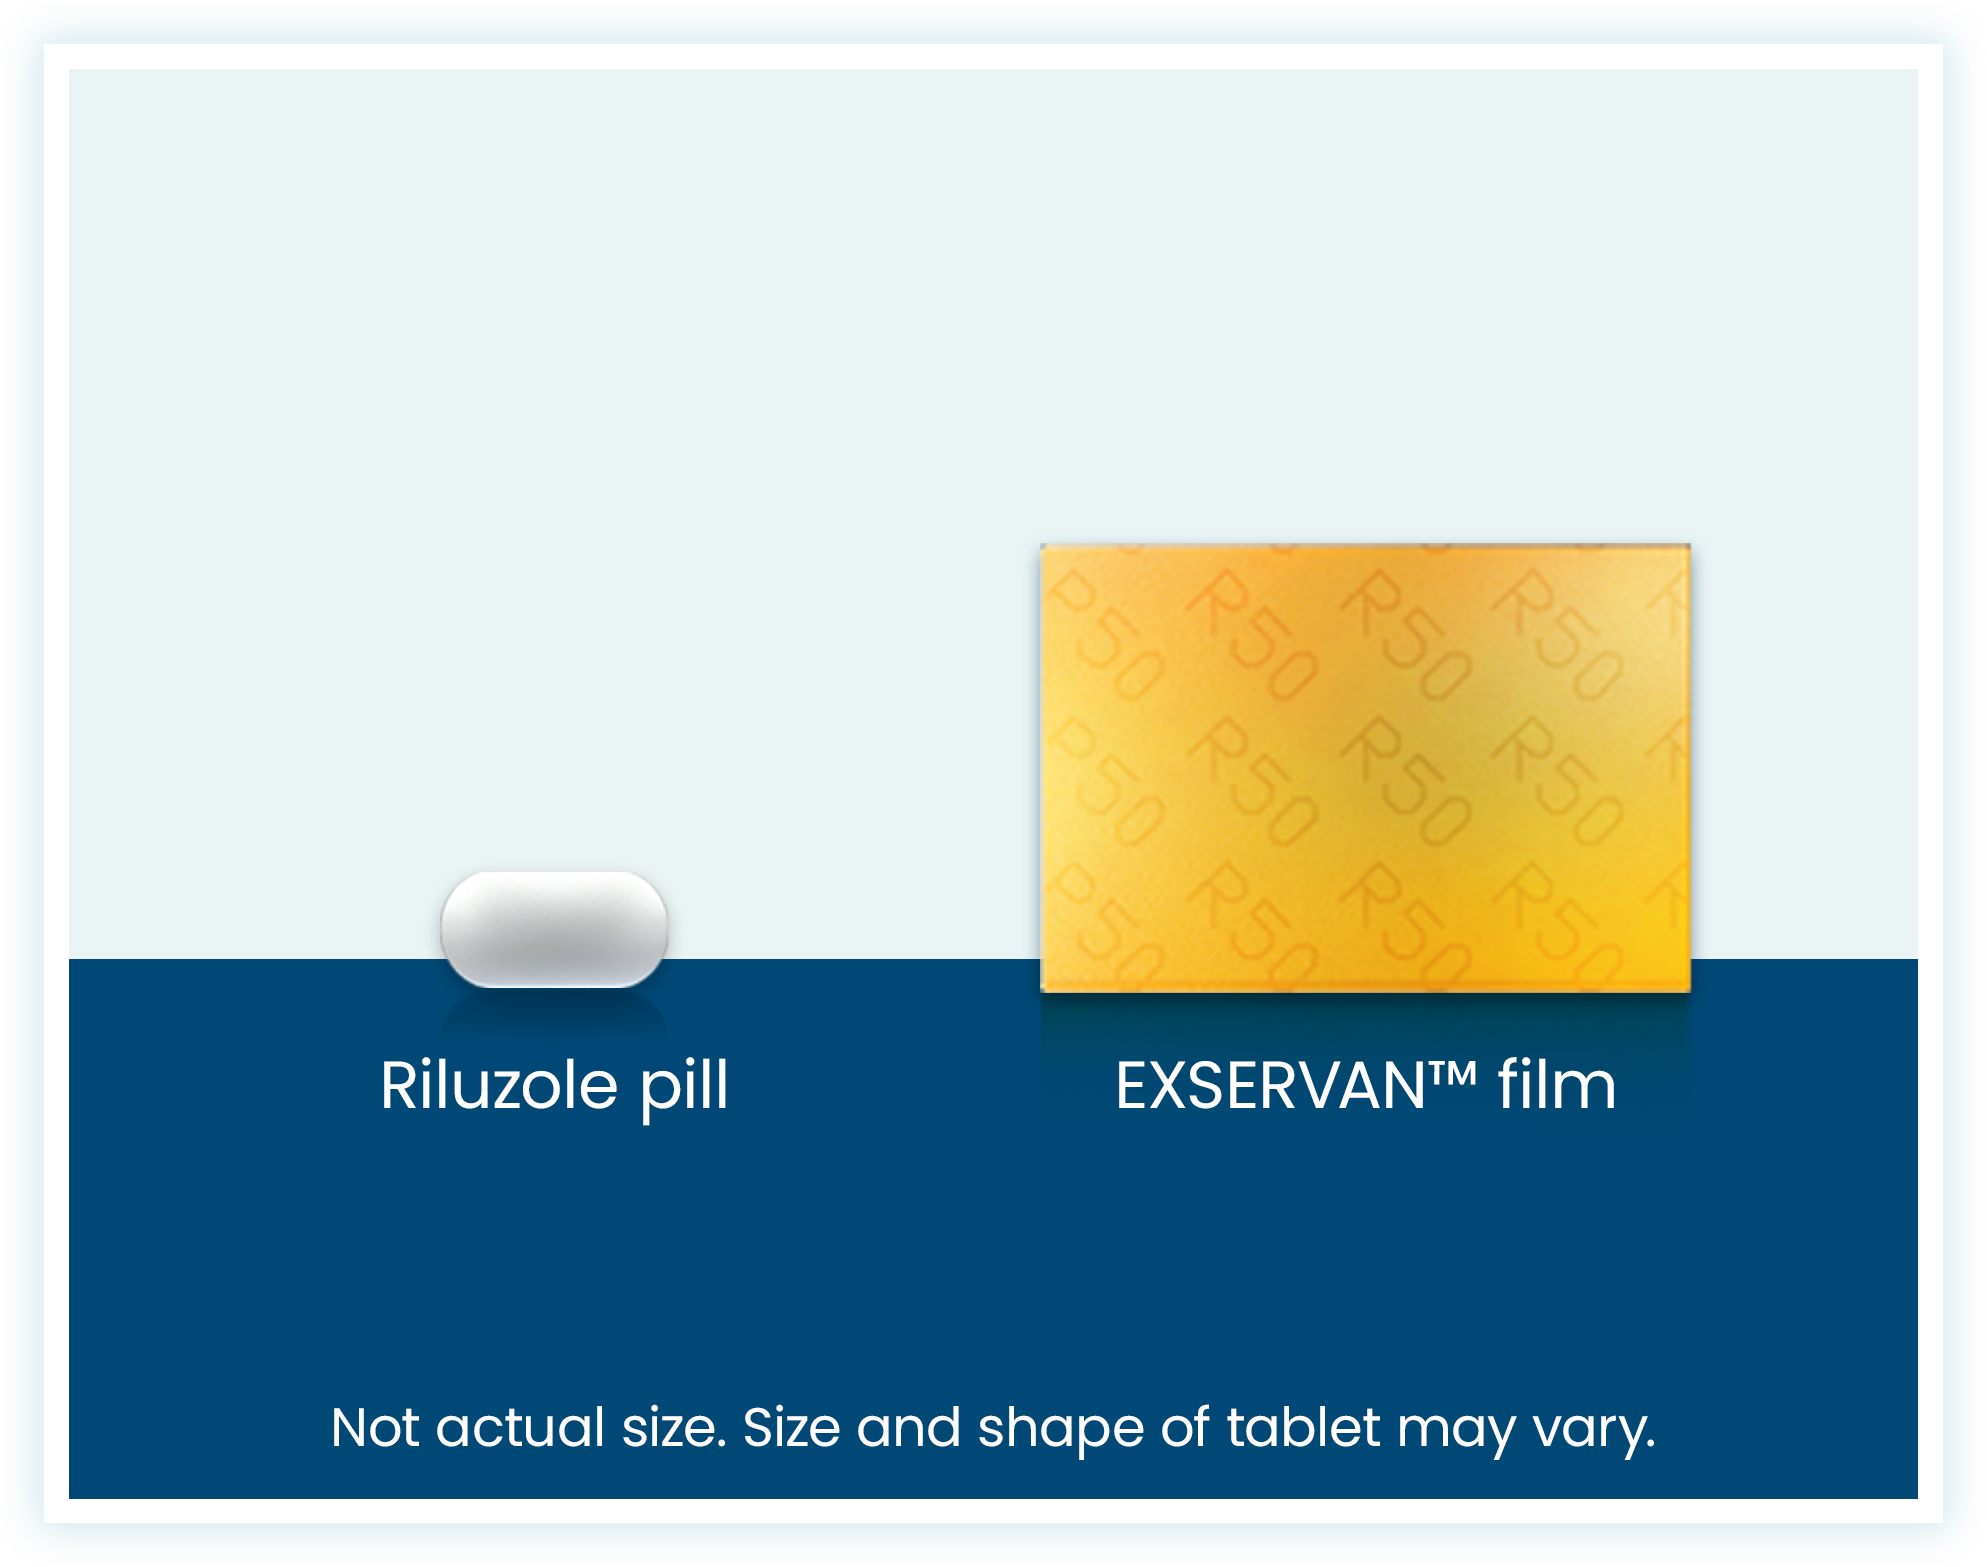 Graphic showing riluzole pill compared to EXSERVAN™ film strip. (Not actual size. Size and shape of table may vary).